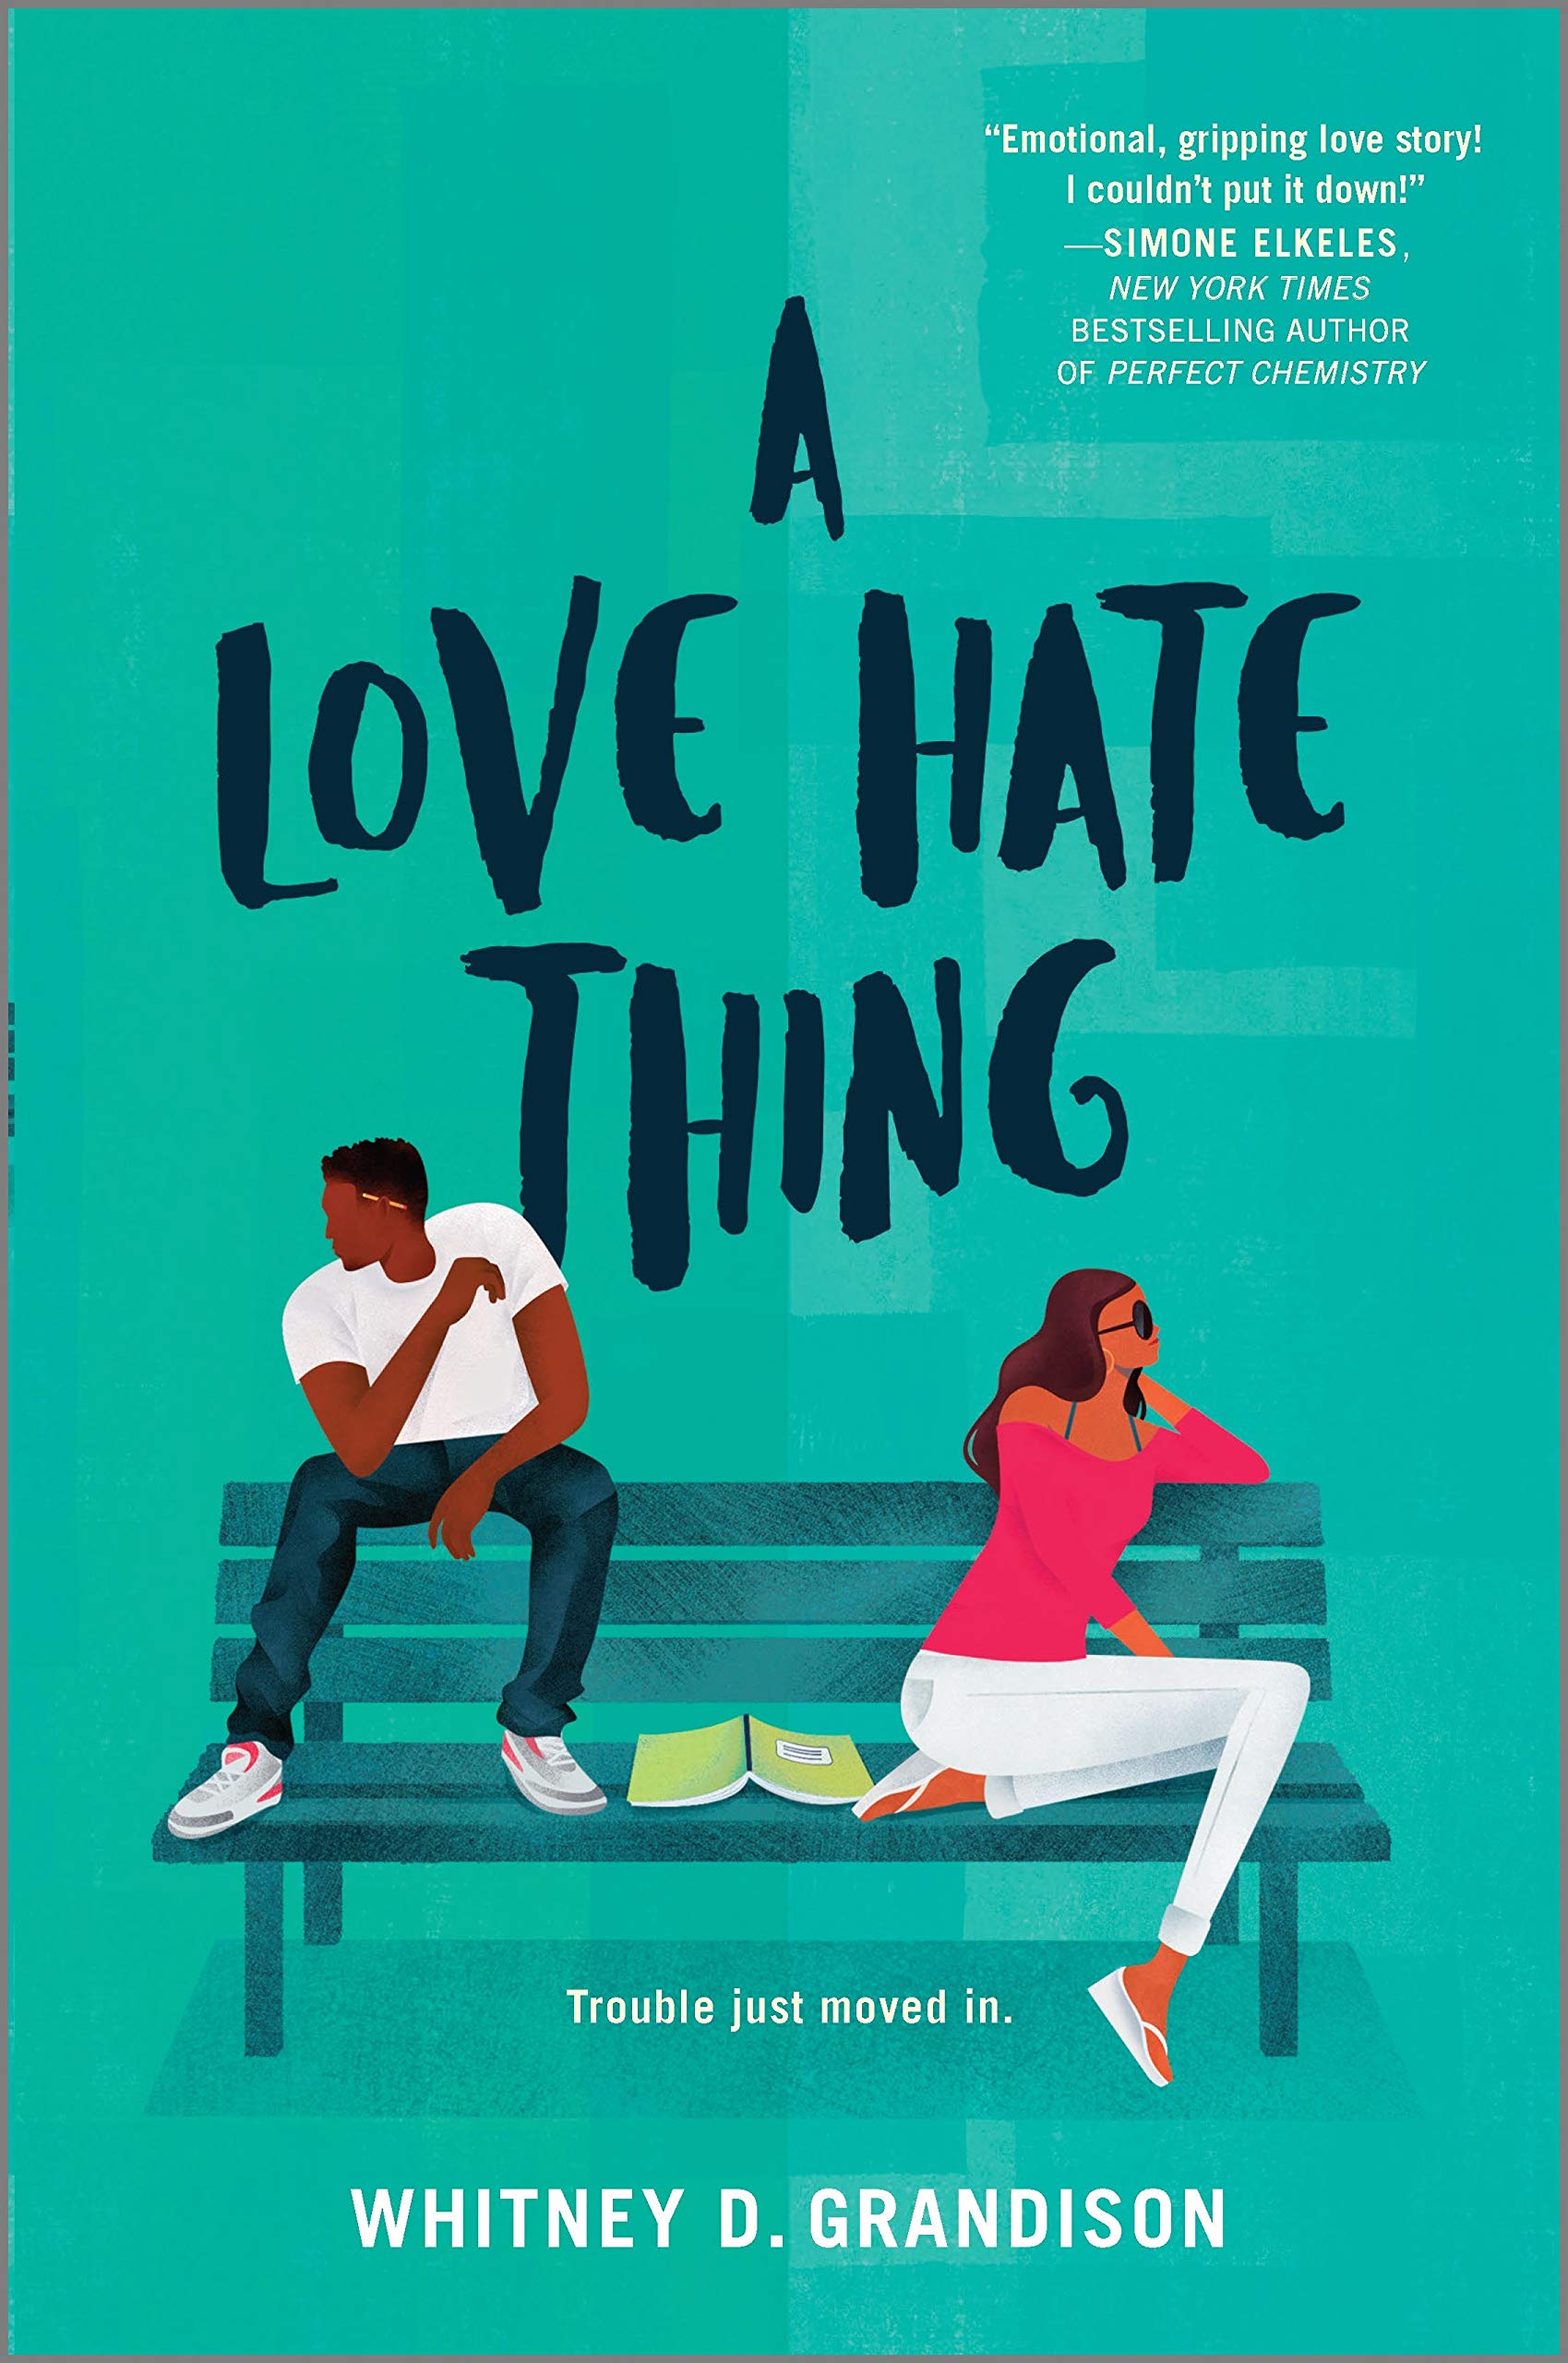 Book Review: “A Love Hate Thing” by Whitney D. Grandison